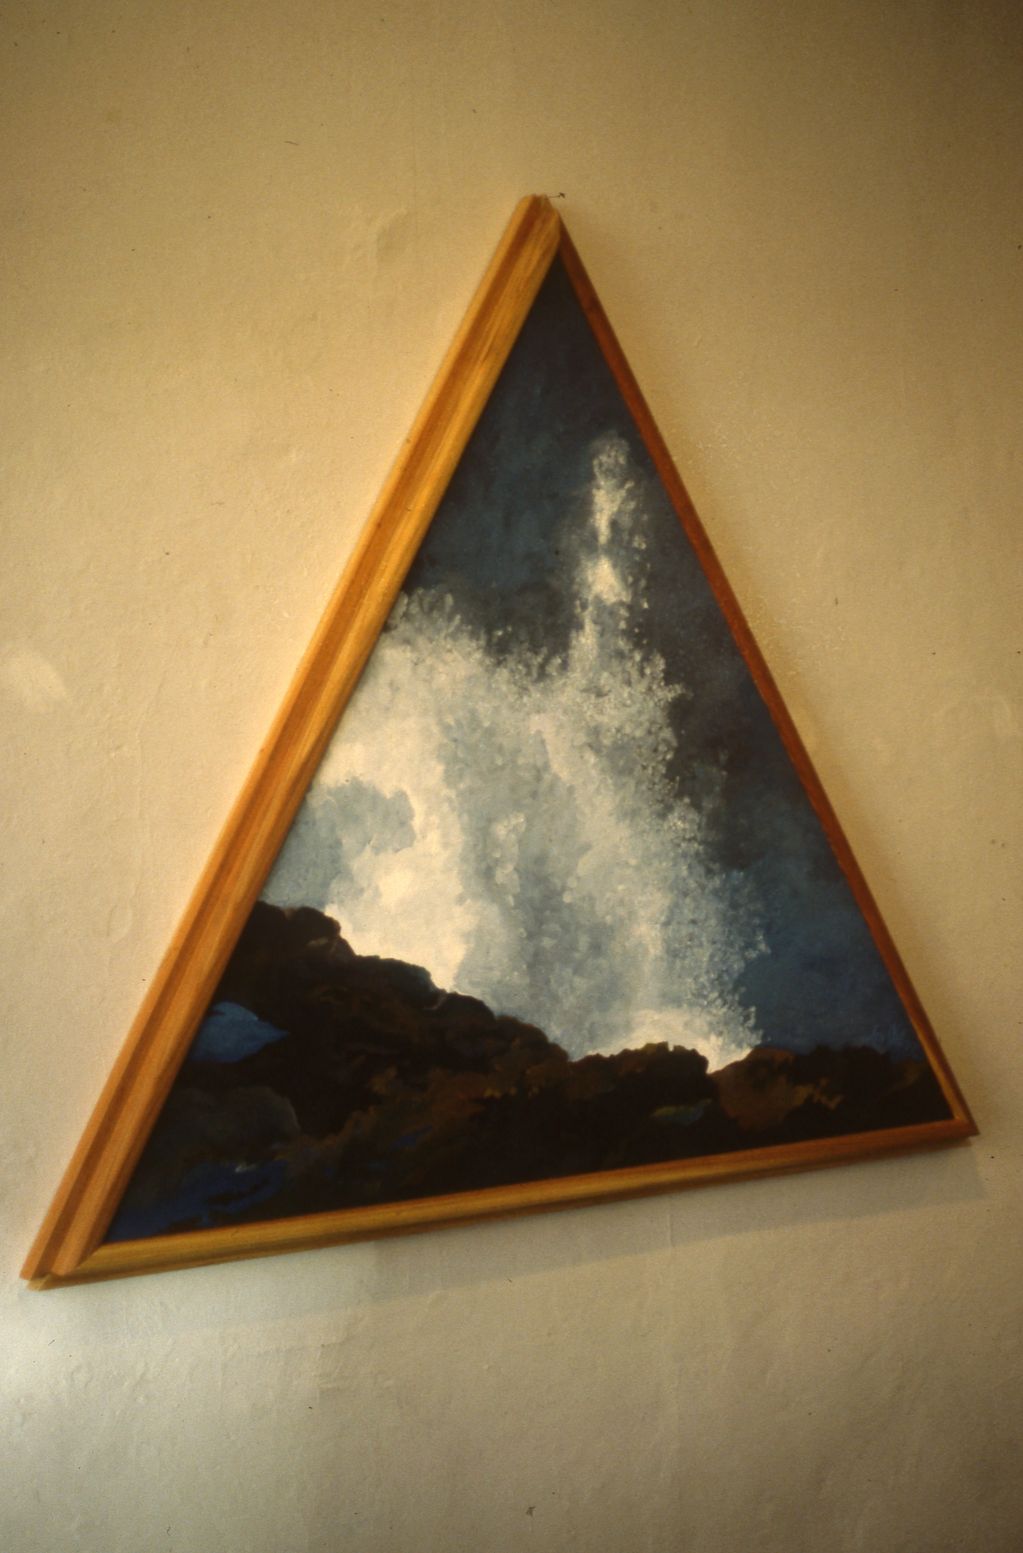 Blow Hole, oil on canvas, 5' x 5' x 5' , by Jon Ohl, 1986